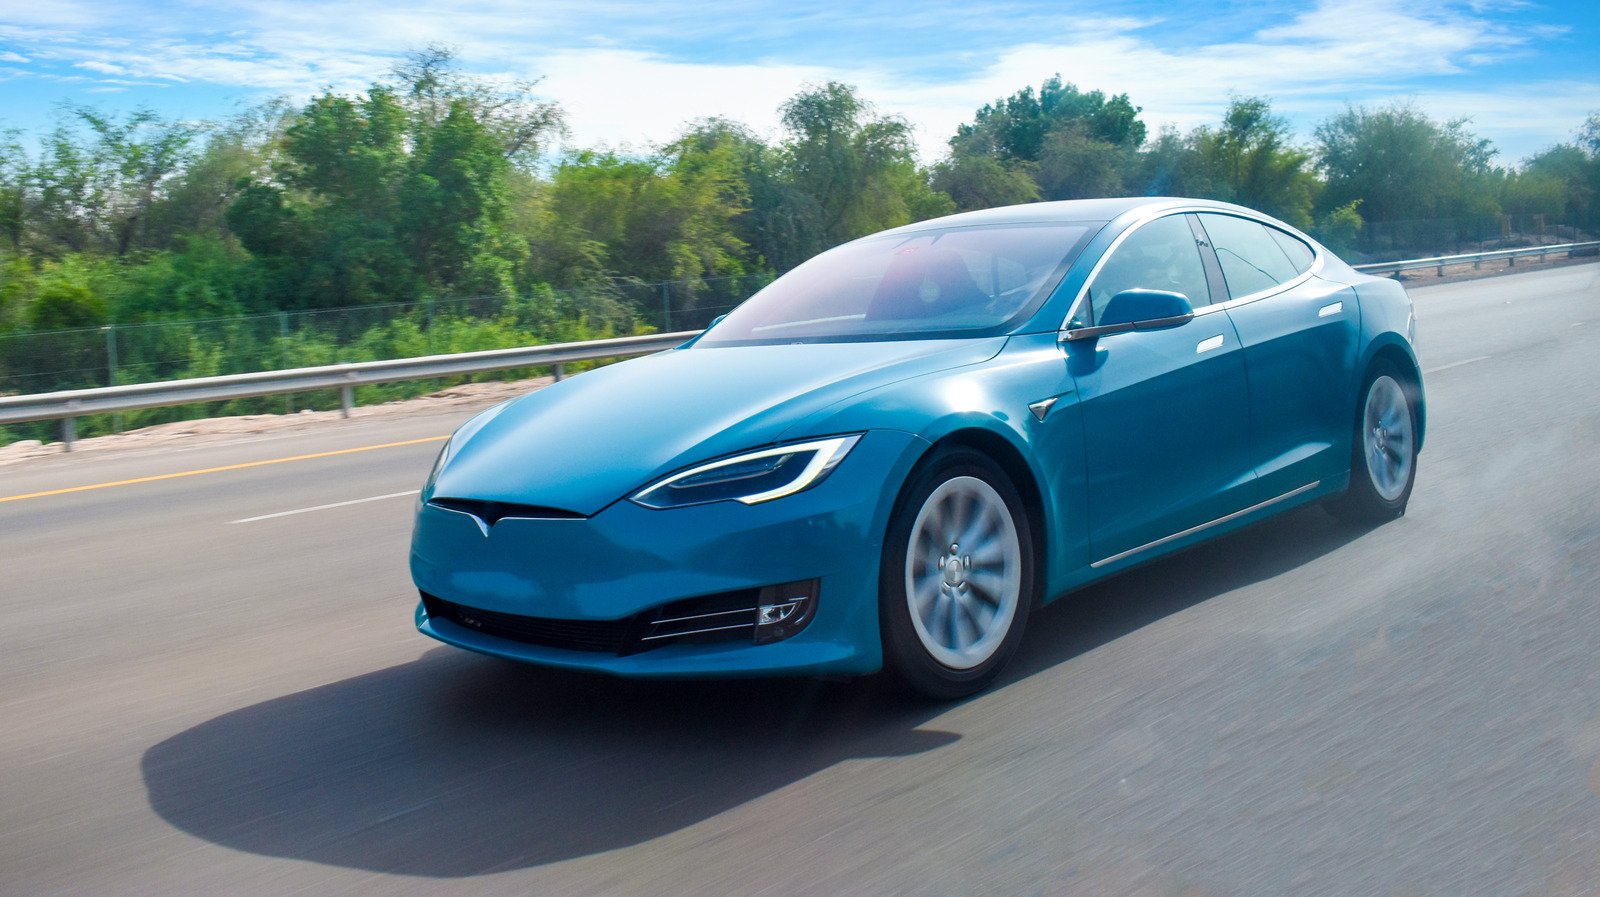 10 Reasons Buying A Tesla Just Isn't Worth It